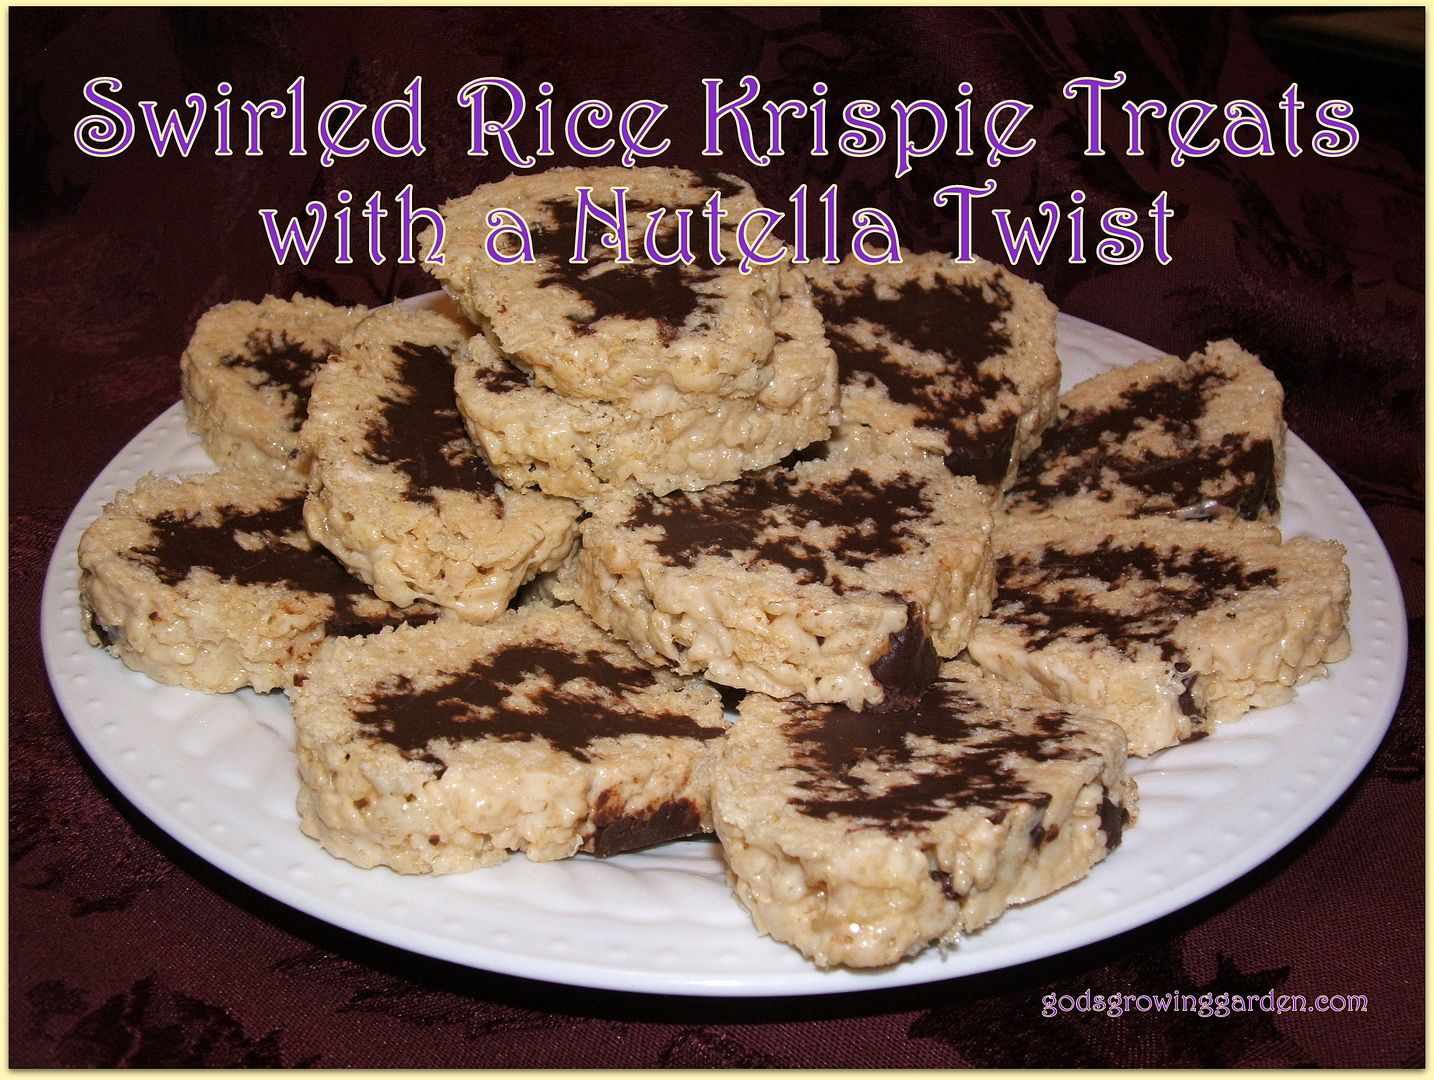 Swirled Krispie Treats, by Angie Ouellette-Tower for godsgrowinggarden.com